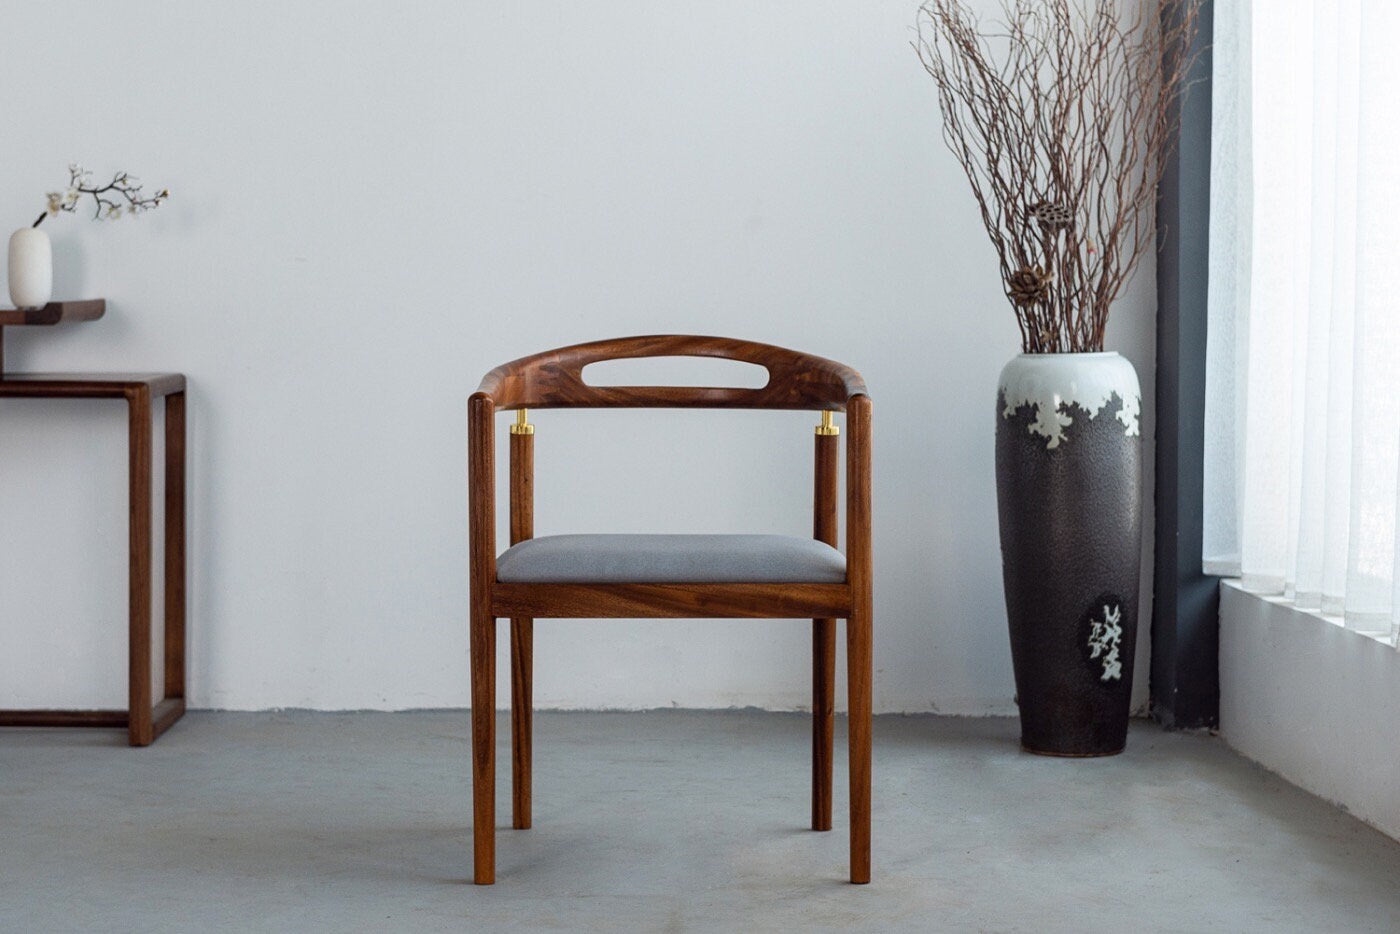 special design chair, leather wood chair, leather chair, wood chair, walnut chair